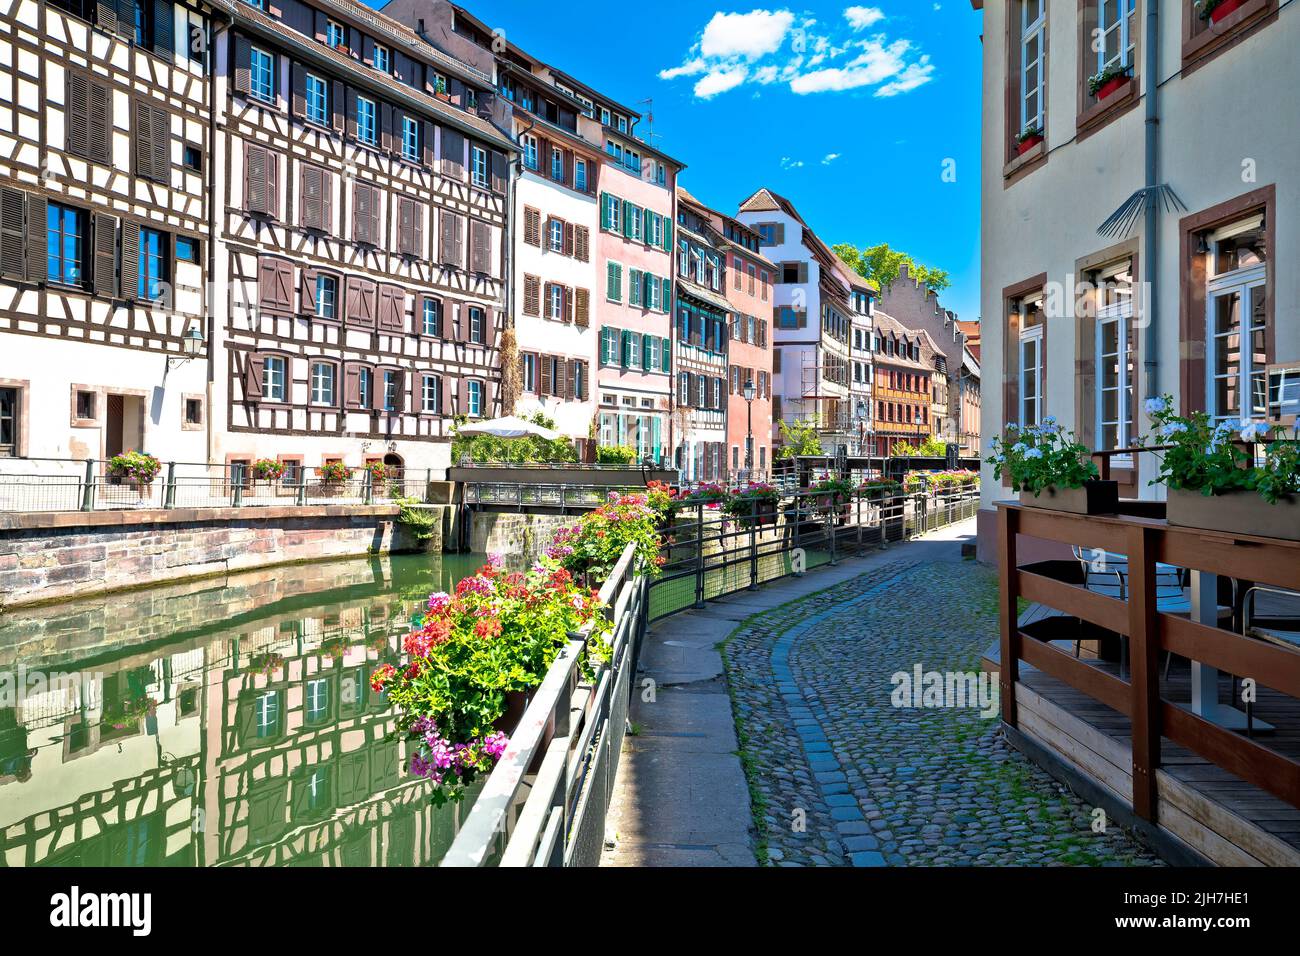 Town of Strasbourg canal and historic architecture in historic Little French quarters, Alsace region of France Stock Photo